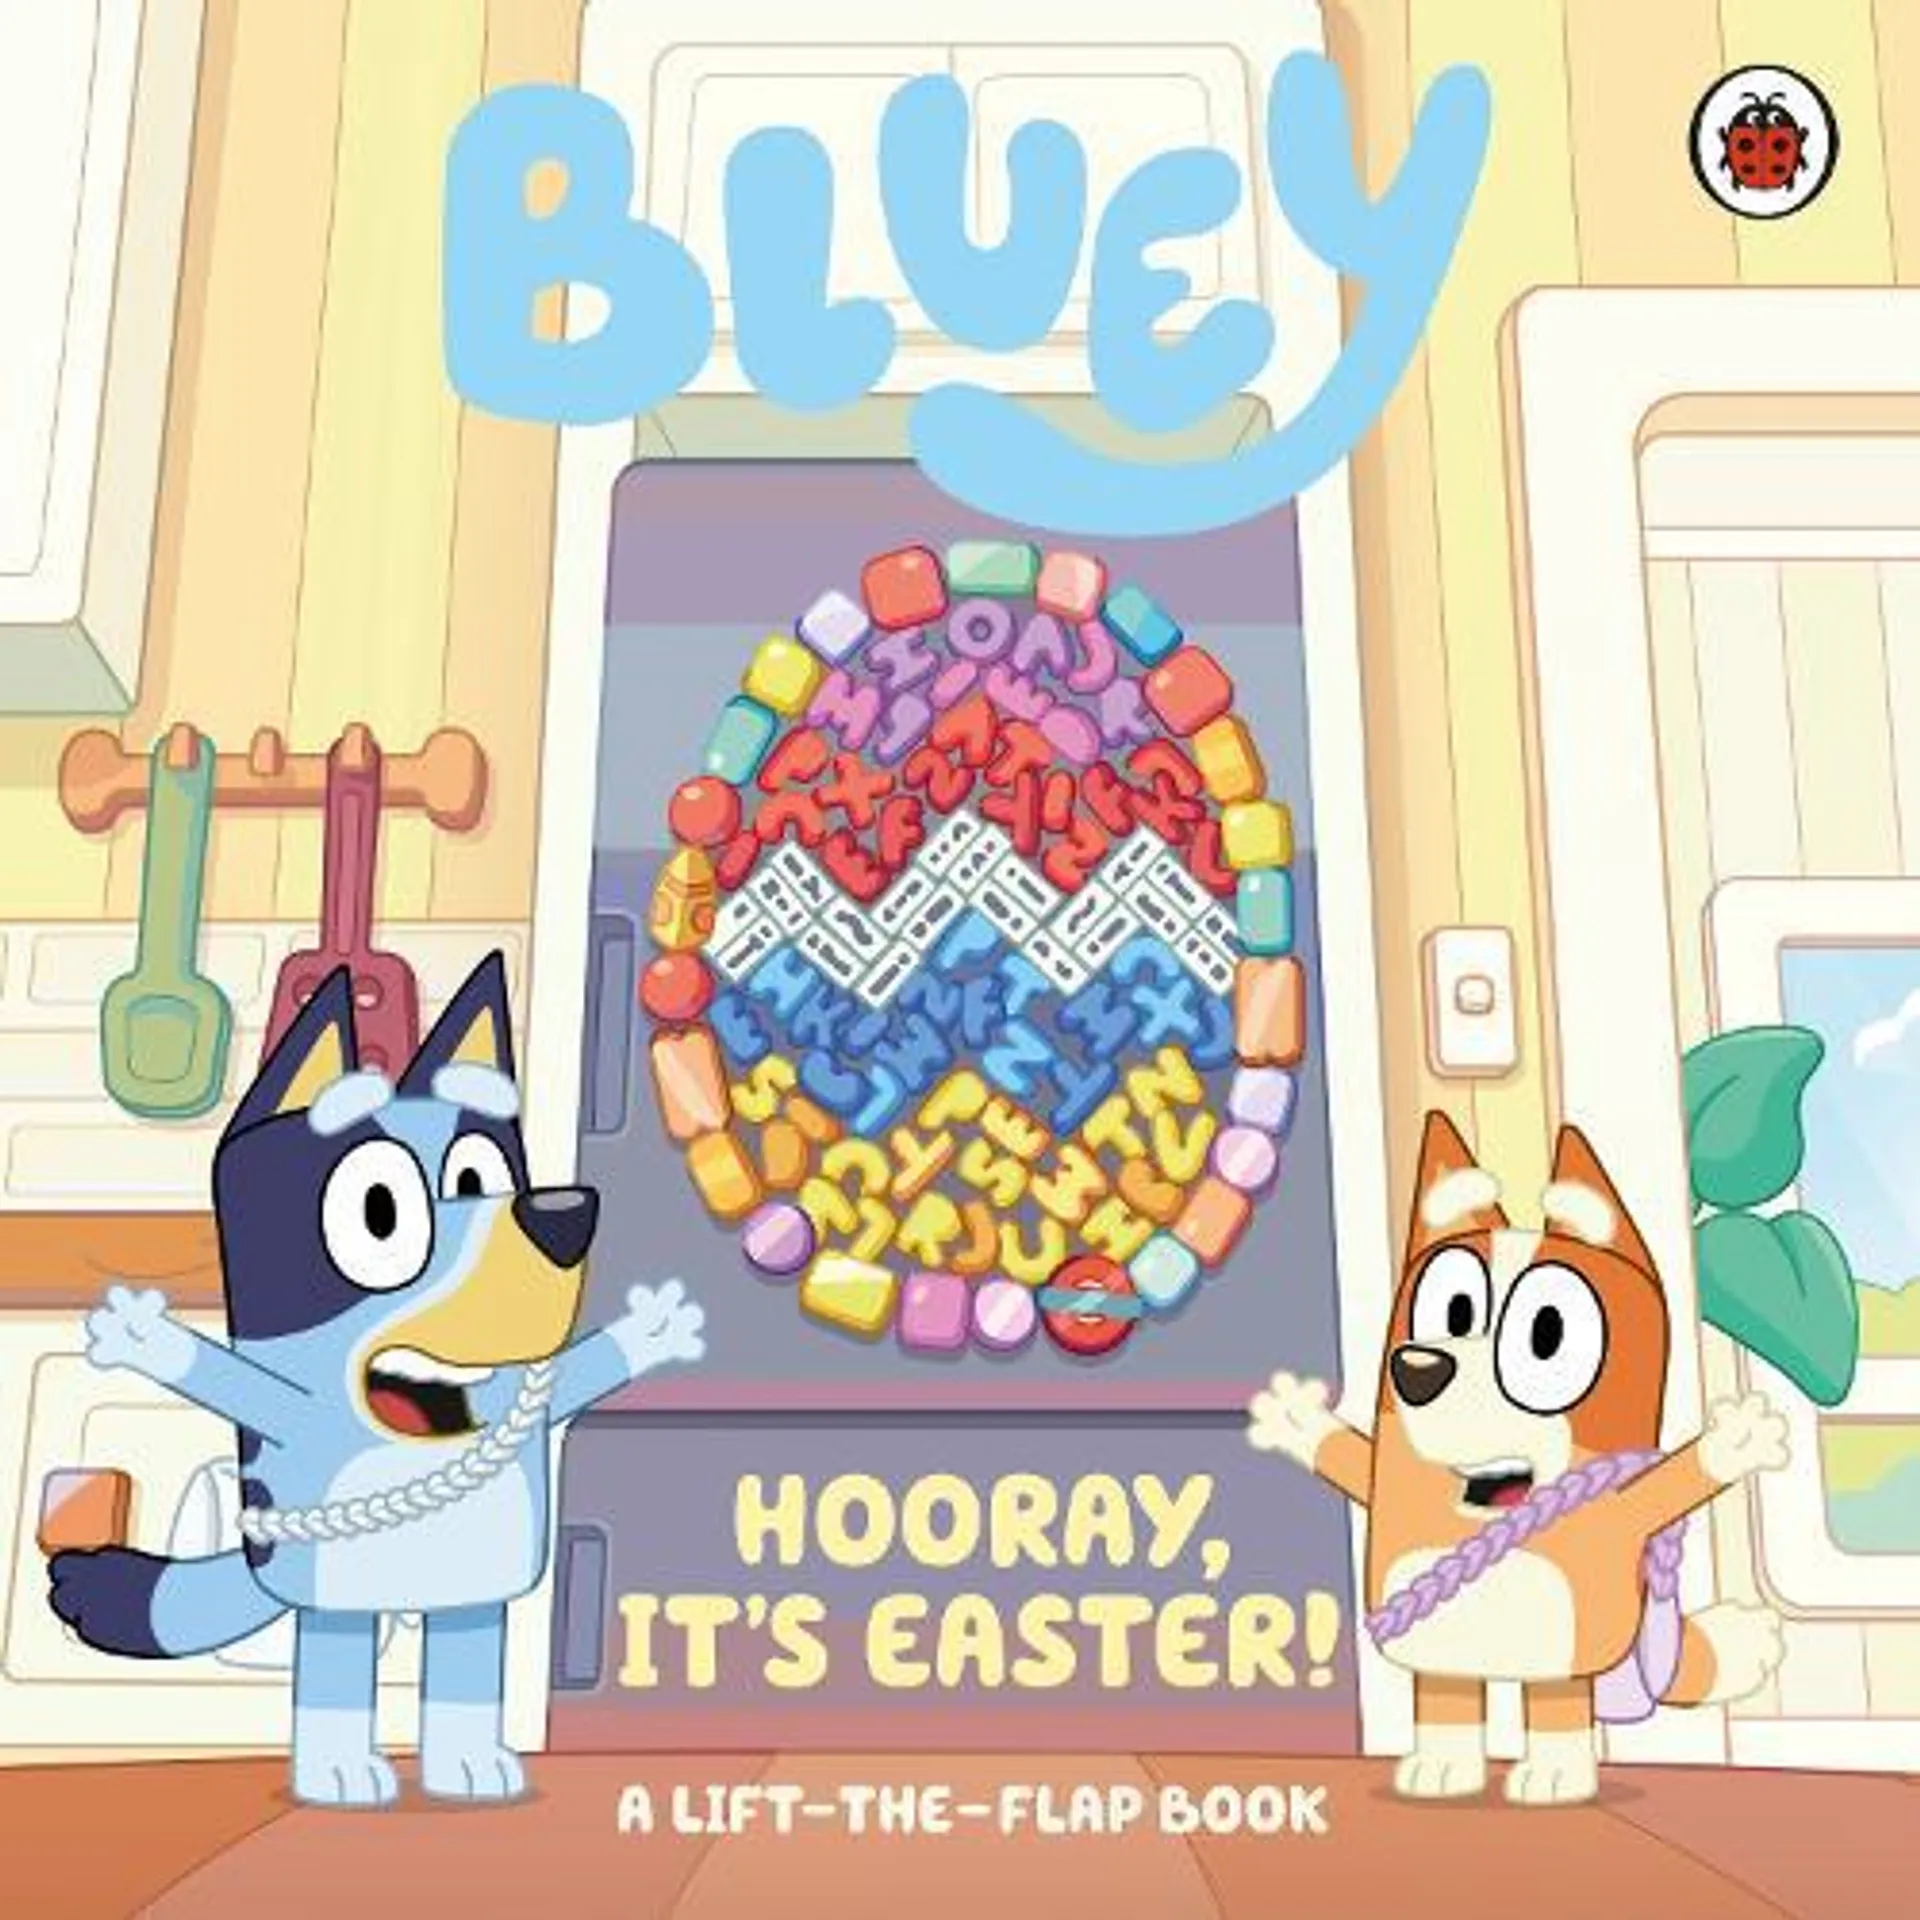 Bluey: Hooray, It’s Easter!: A Lift-the-Flap Book - Bluey (Board book)